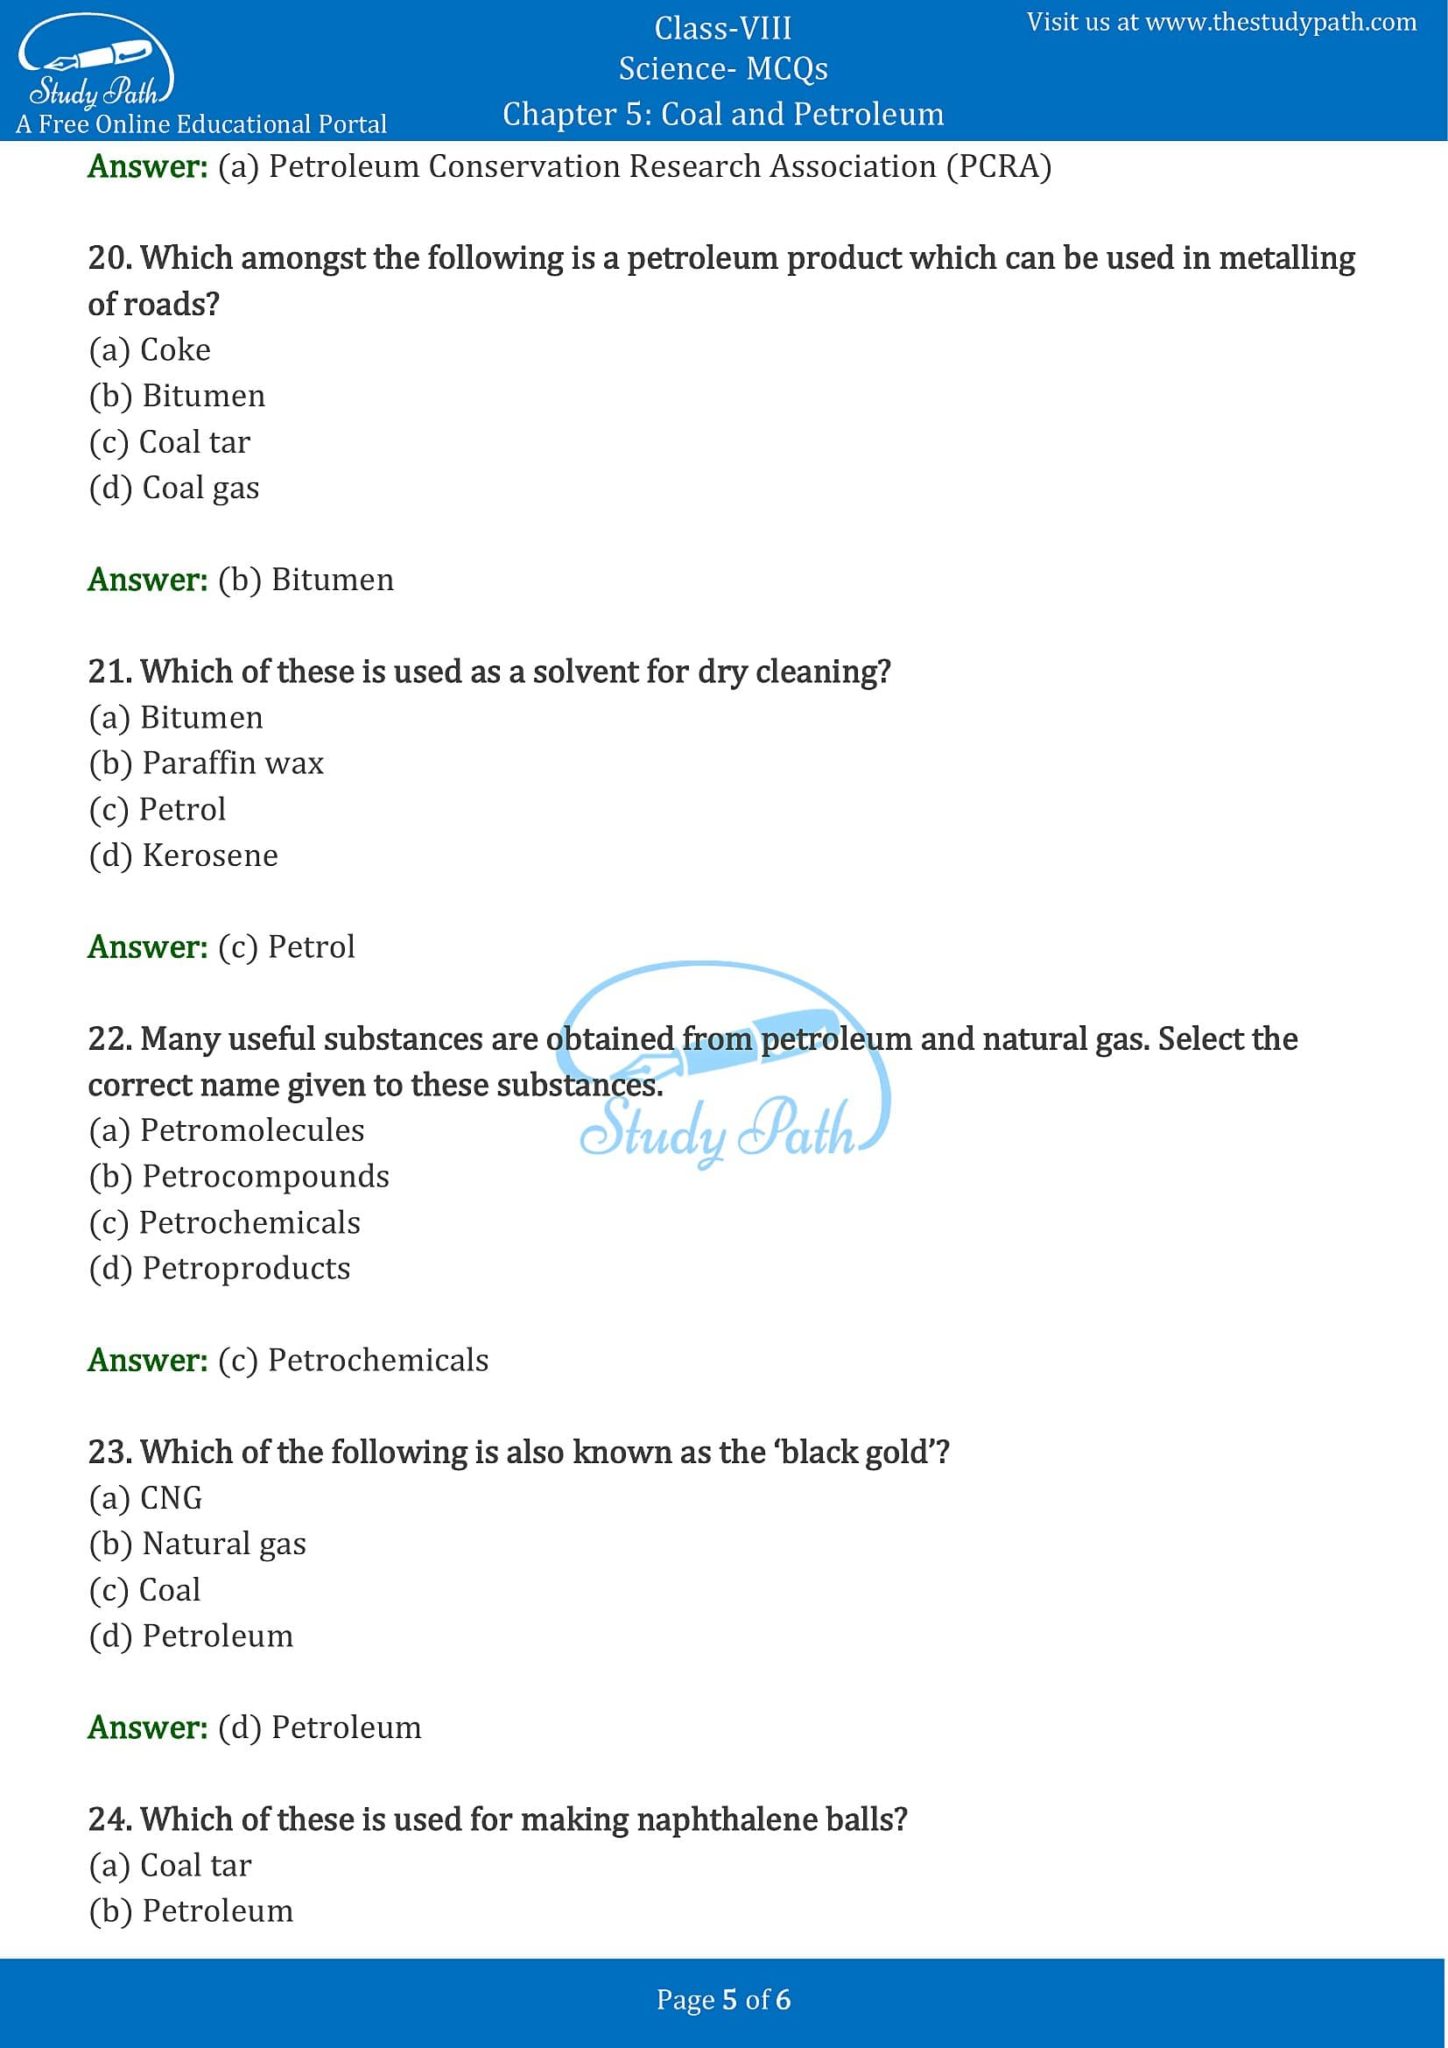 Class 8 Science Chapter 5 Coal and Petroleum MCQ with Answers